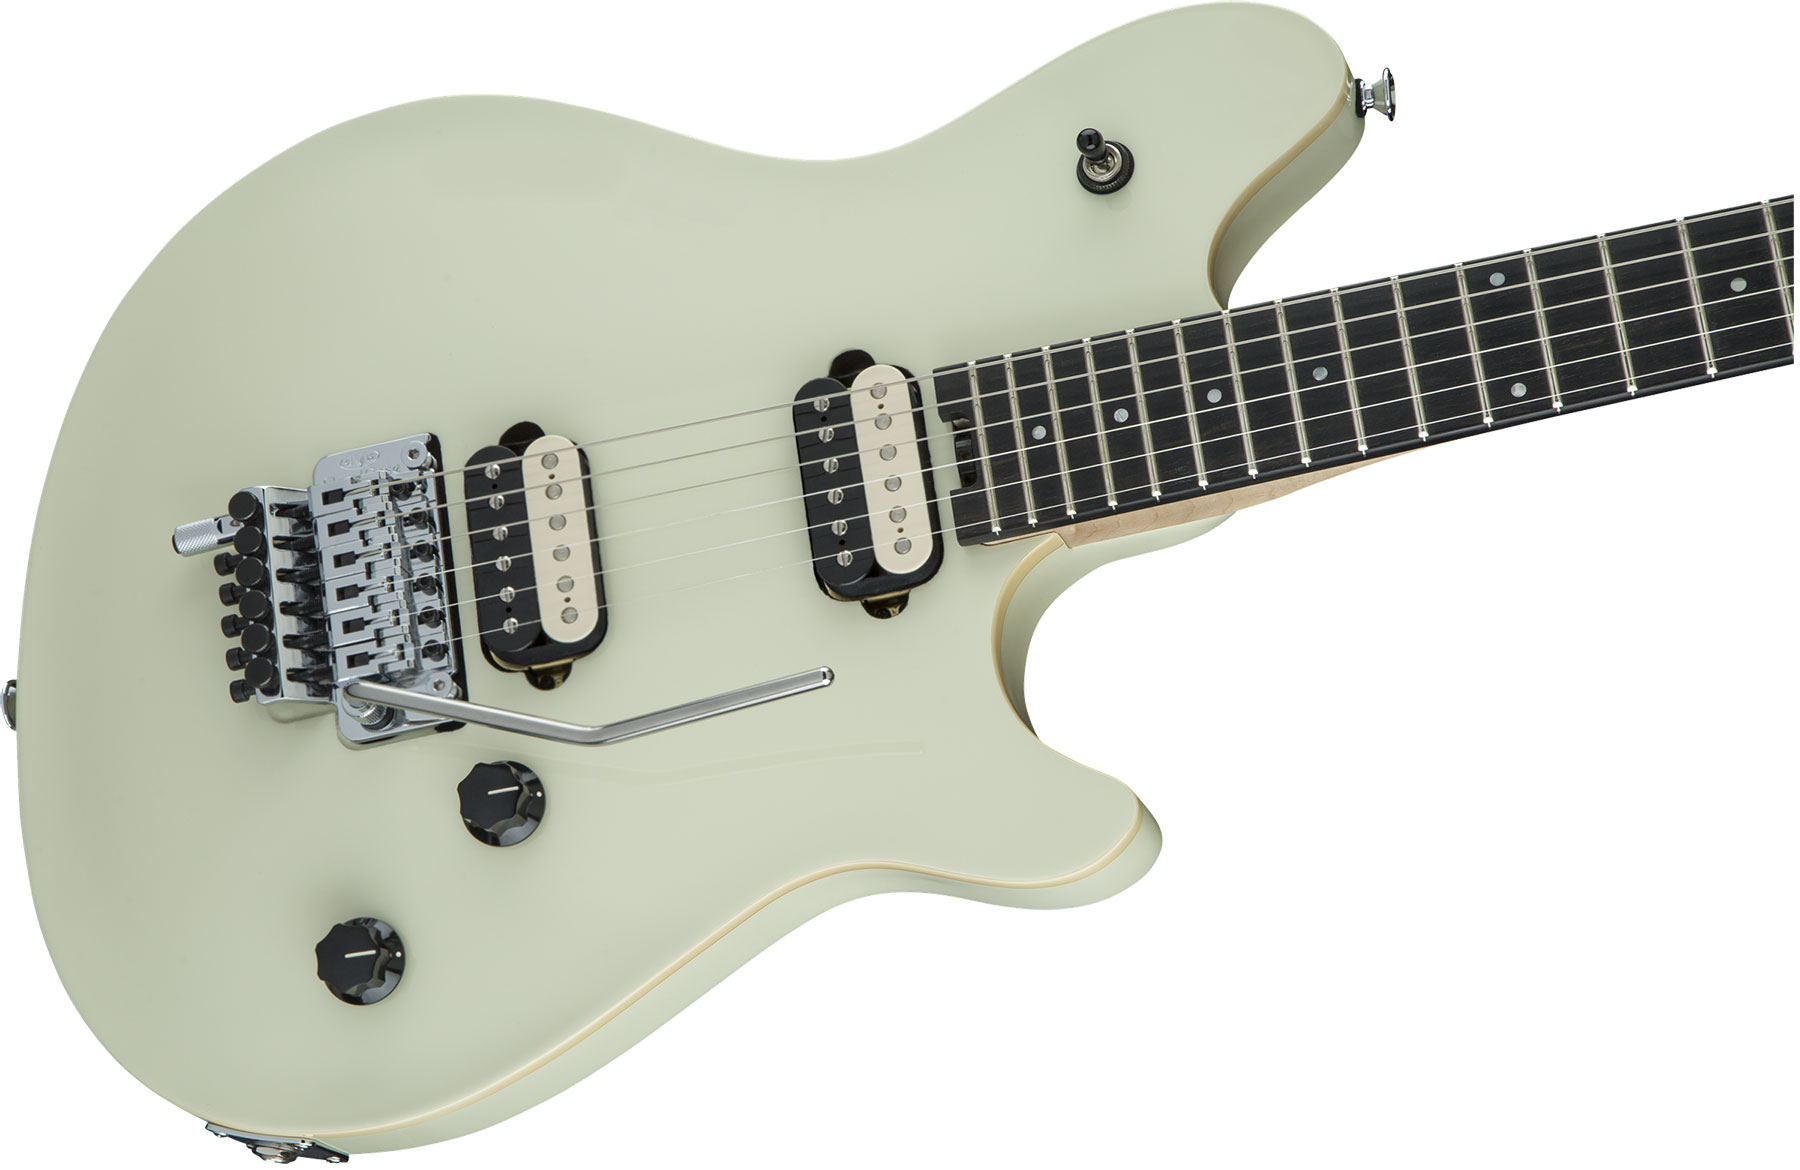 Evh Wolfgang Special Signature Mex 2h Fr Eb - Ivory - Double cut electric guitar - Variation 2